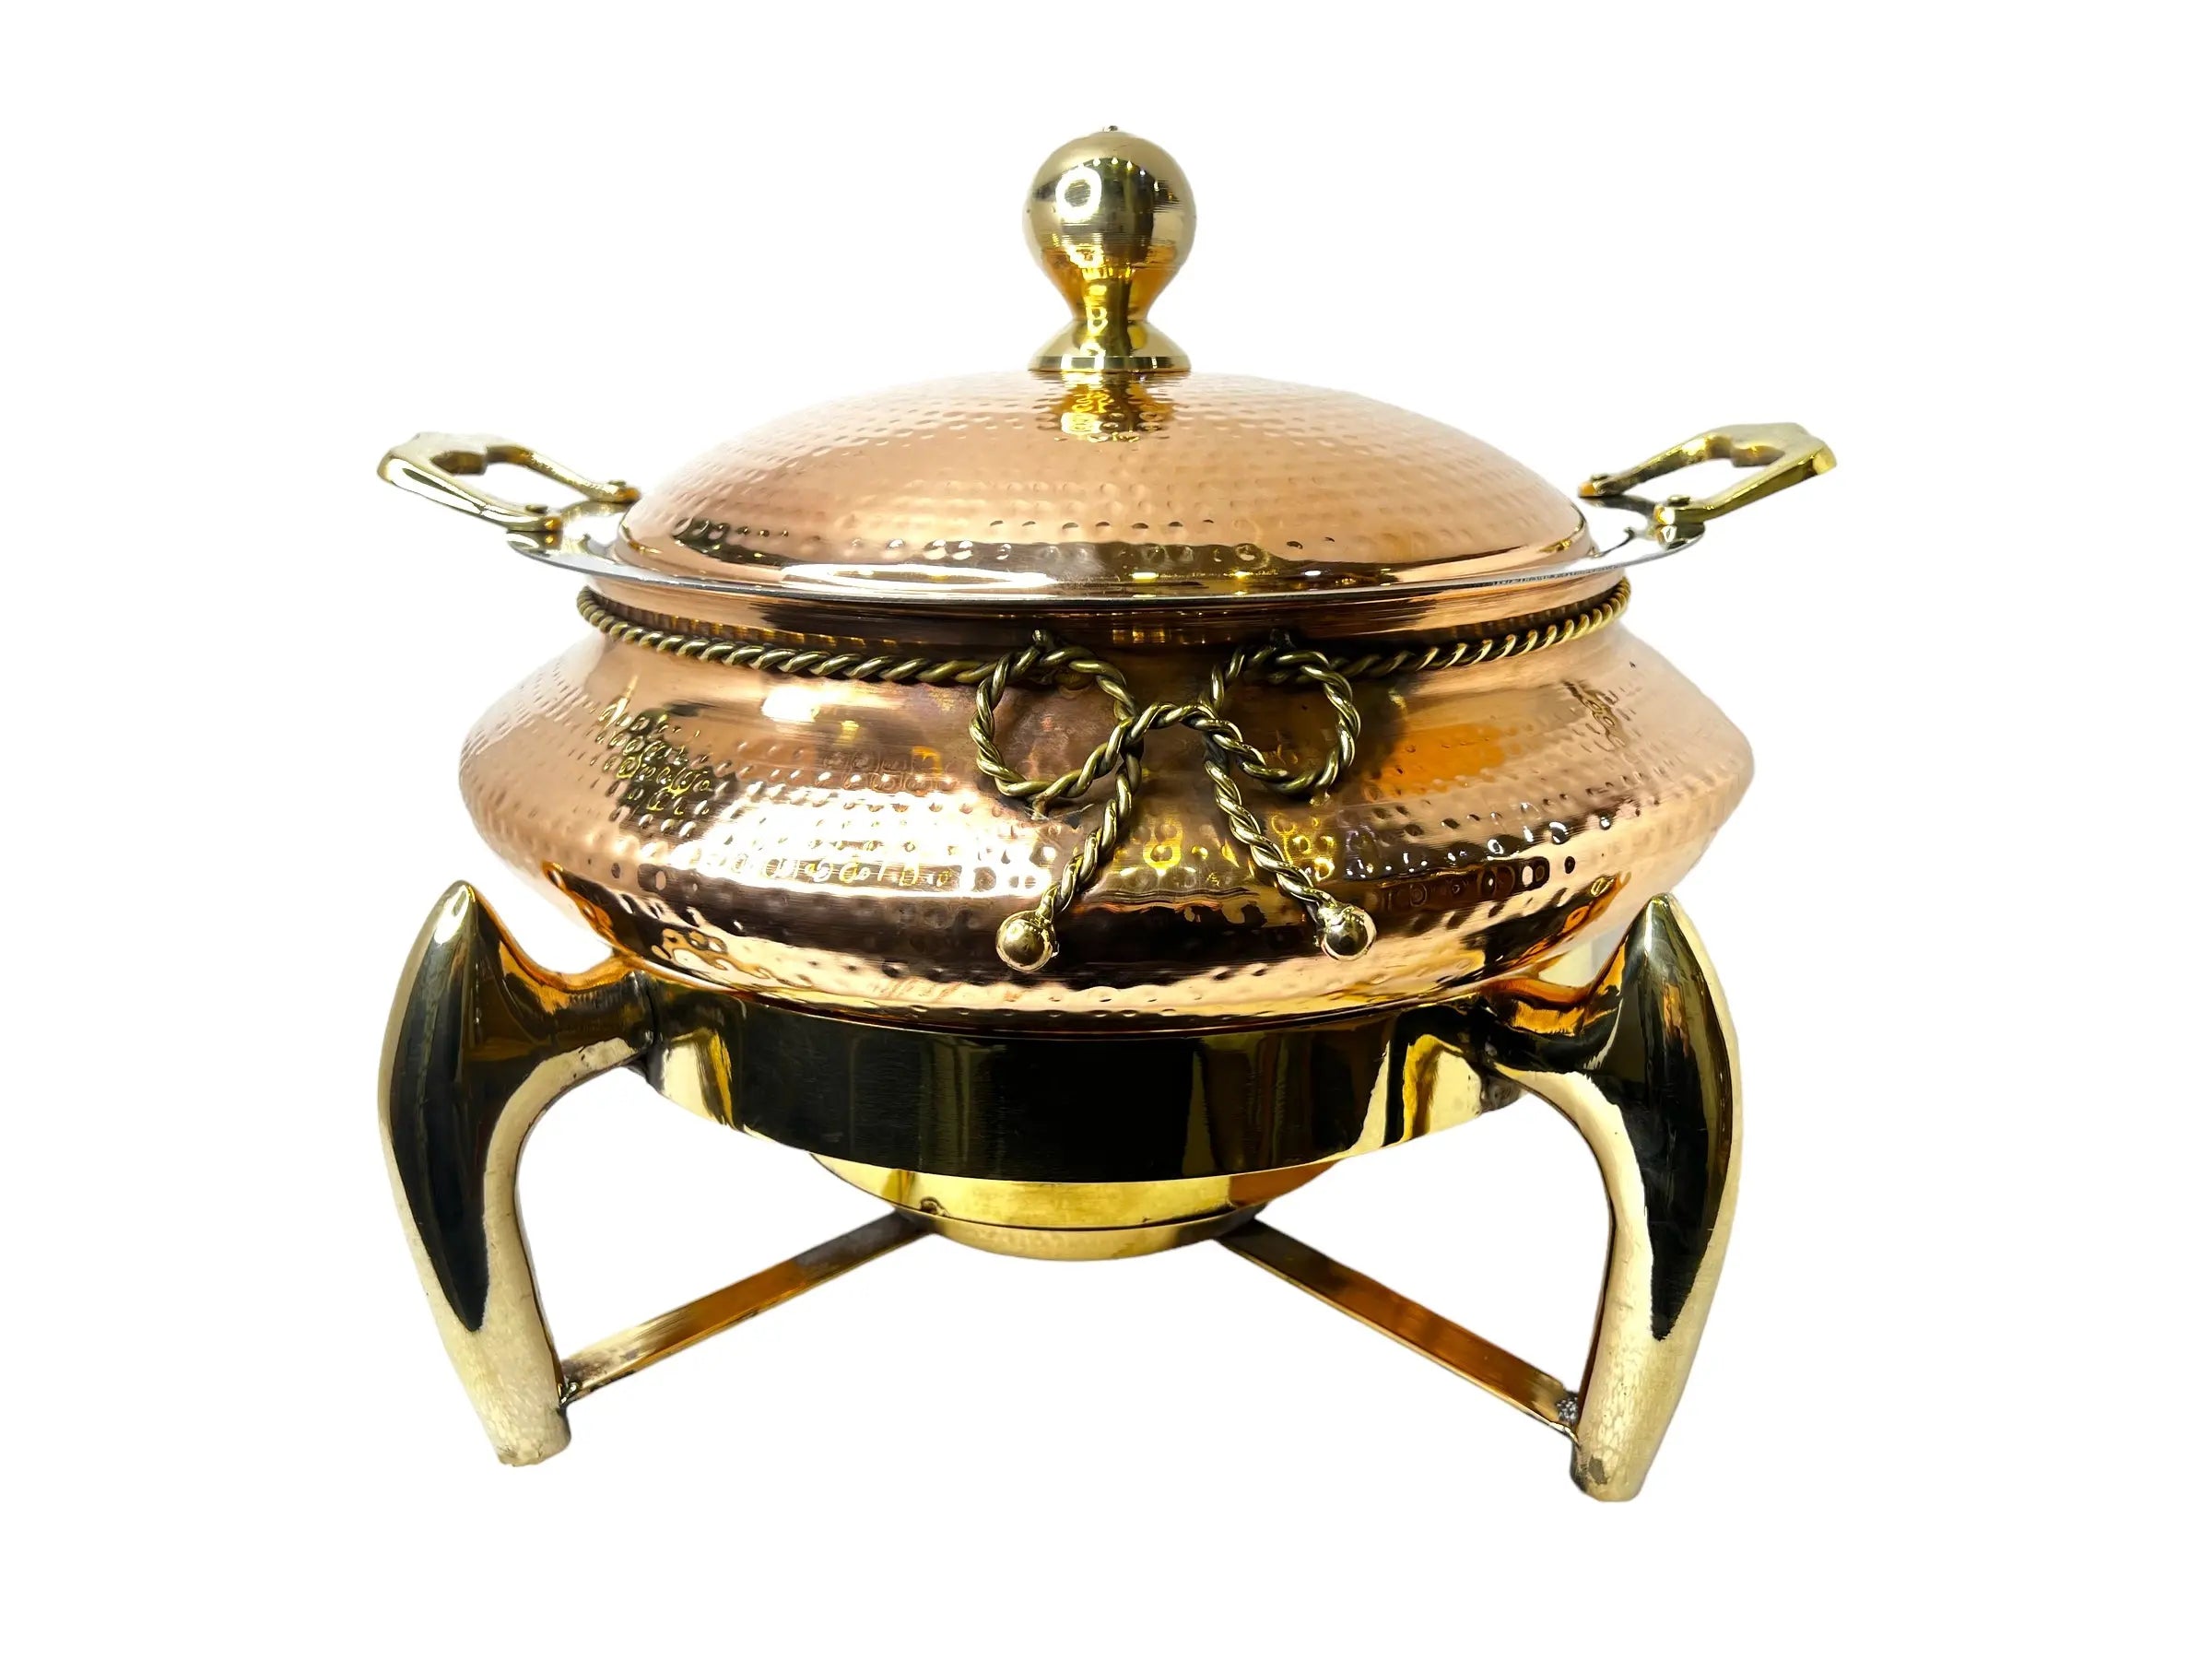 Crockery Wala And Company Pure Copper Chafing Dish New Jersey Style for Parties and functions - CROCKERY WALA AND COMPANY 